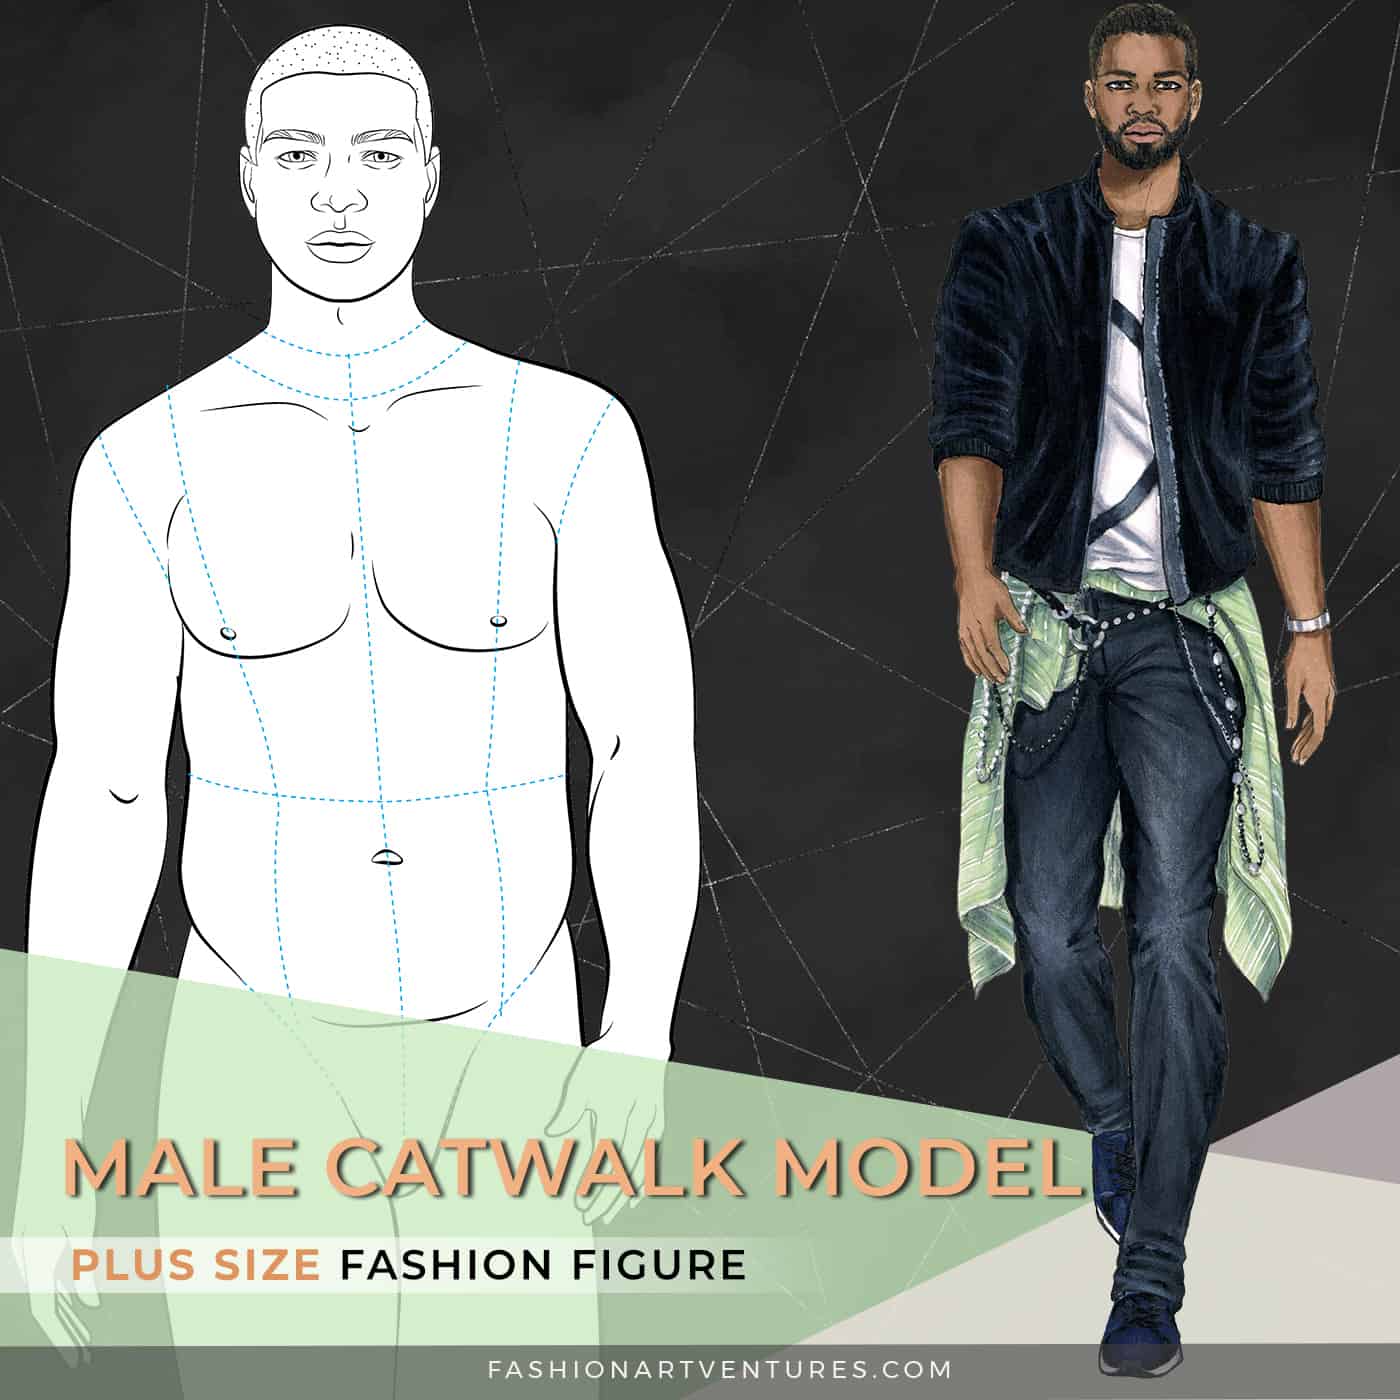 Learn These 5 Male Model Poses for Better Photos - Adorama